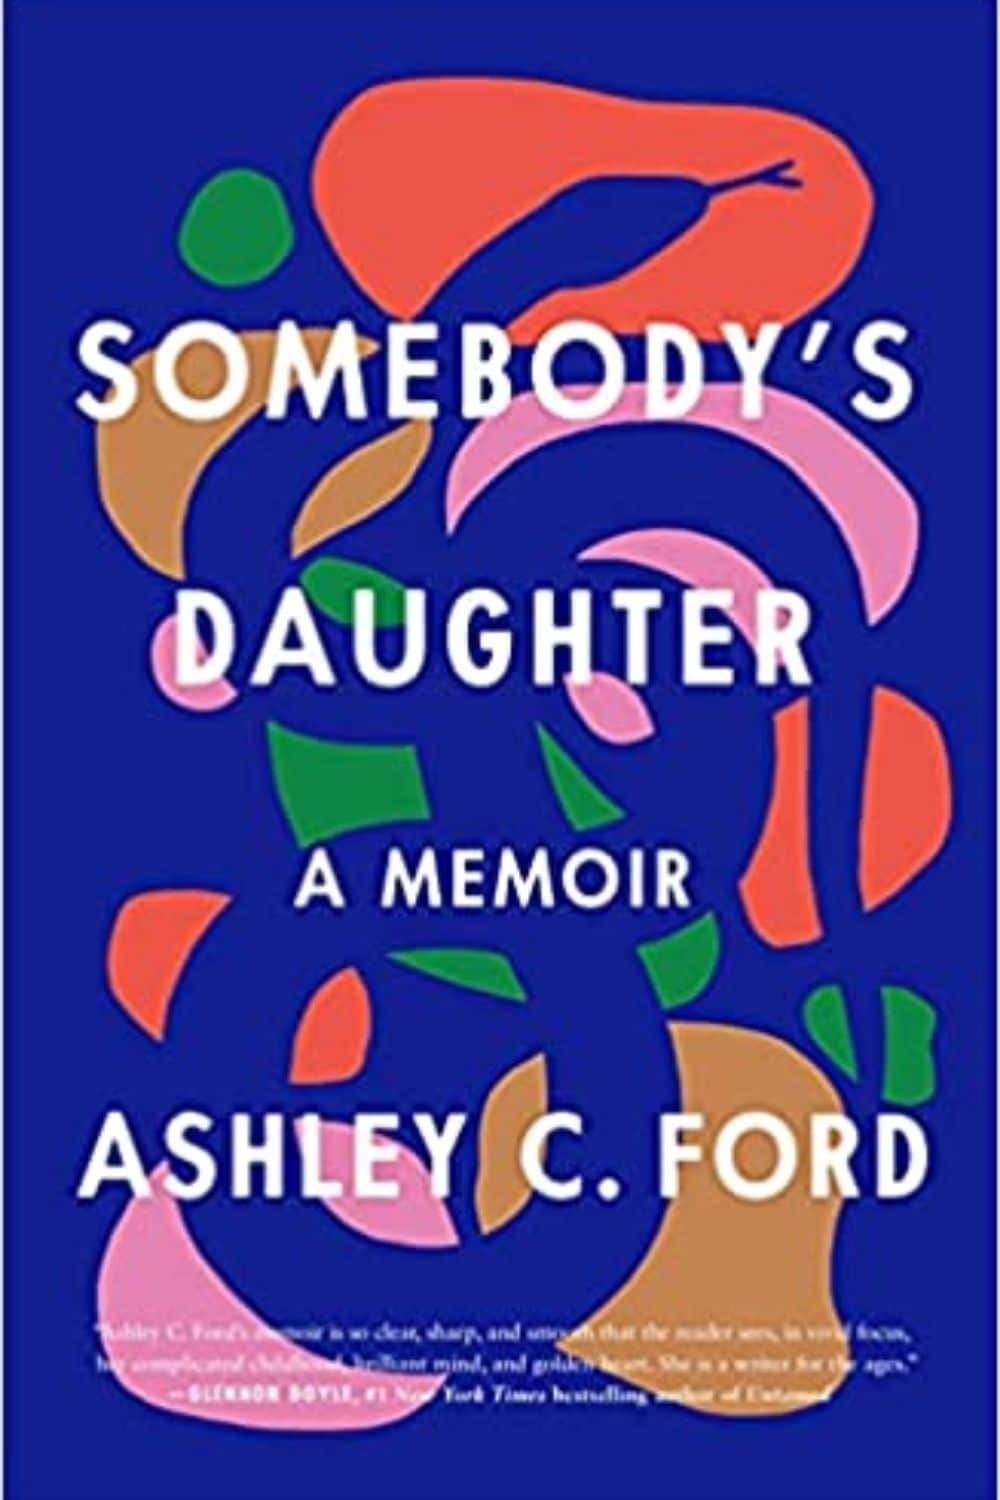 Somebody's daughter By Ashley C. Ford | Honest, Loving And Beautifully Written